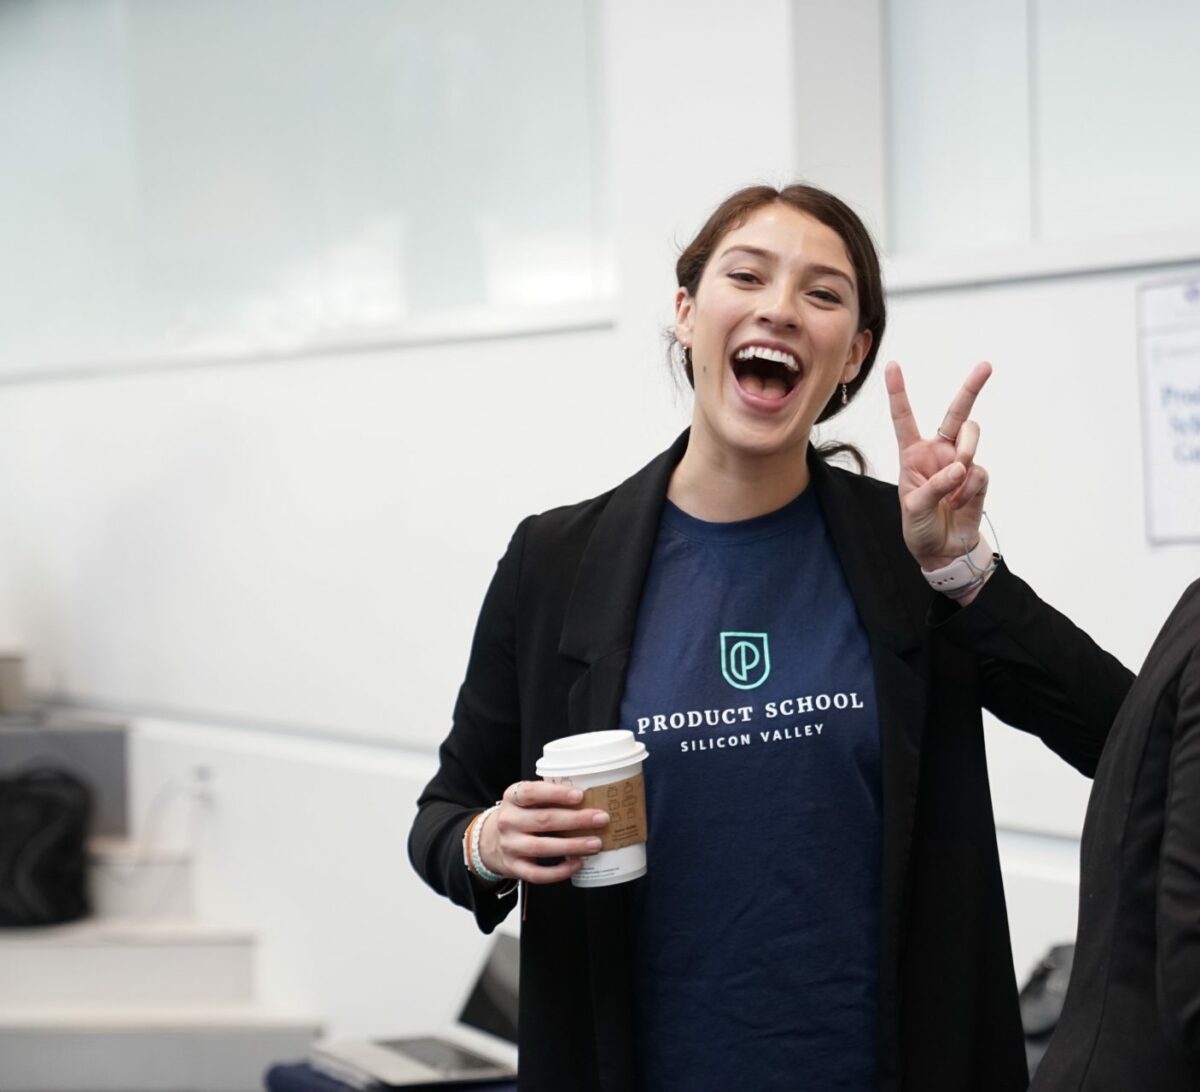 woman looking extremely happy holding a coffee and holding up a peace sign with her hand in an office space